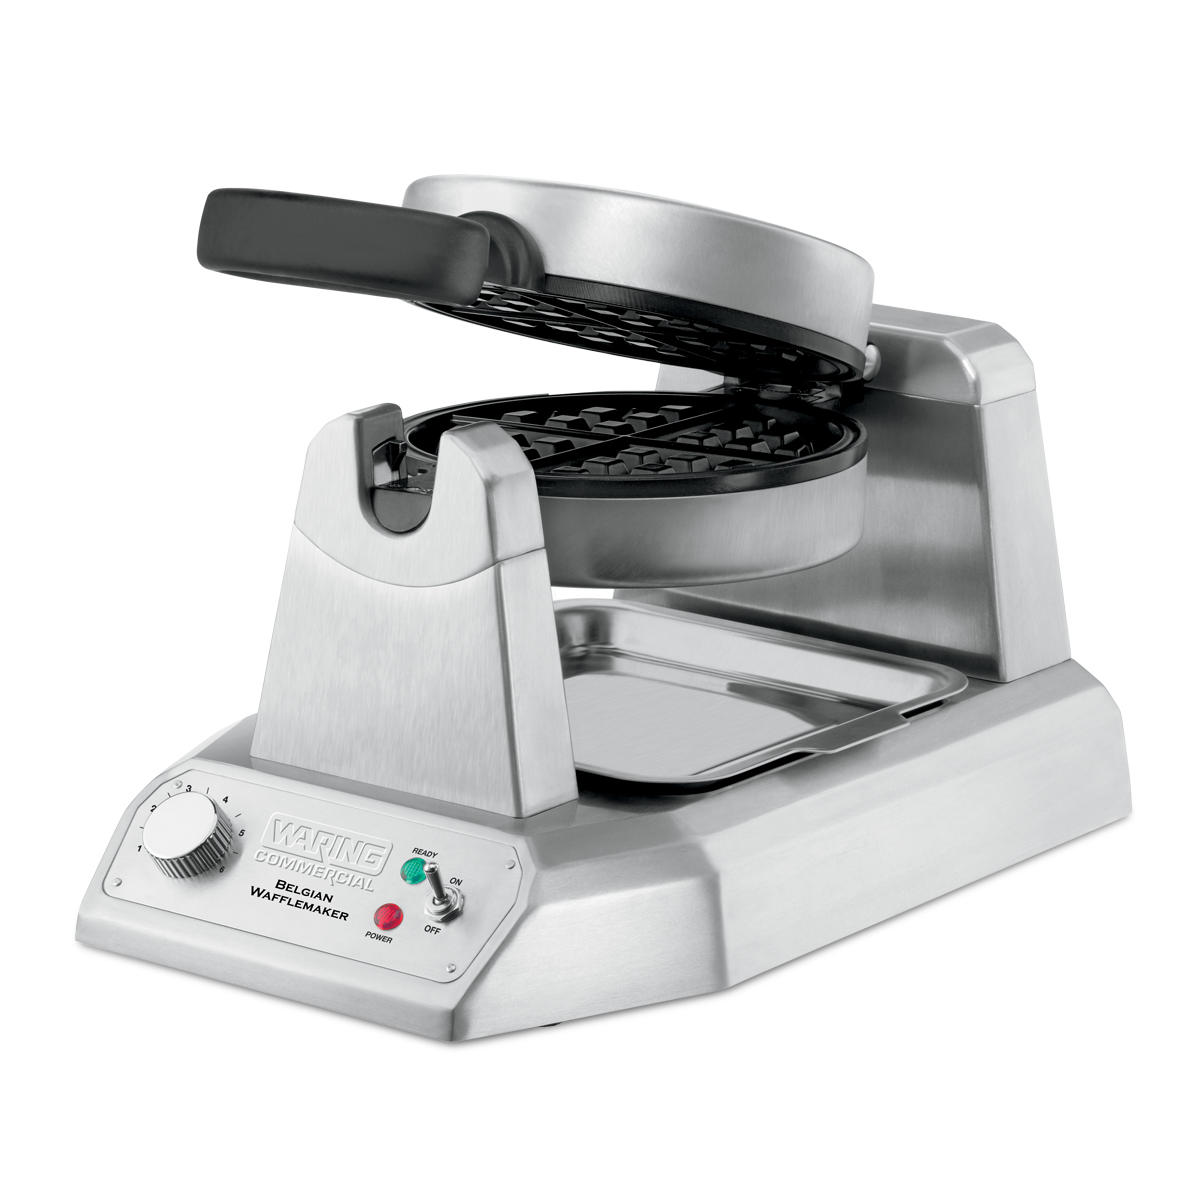 https://www.waringcommercialproducts.com/files/products/ww180-waring-waffle-maker-main.jpg